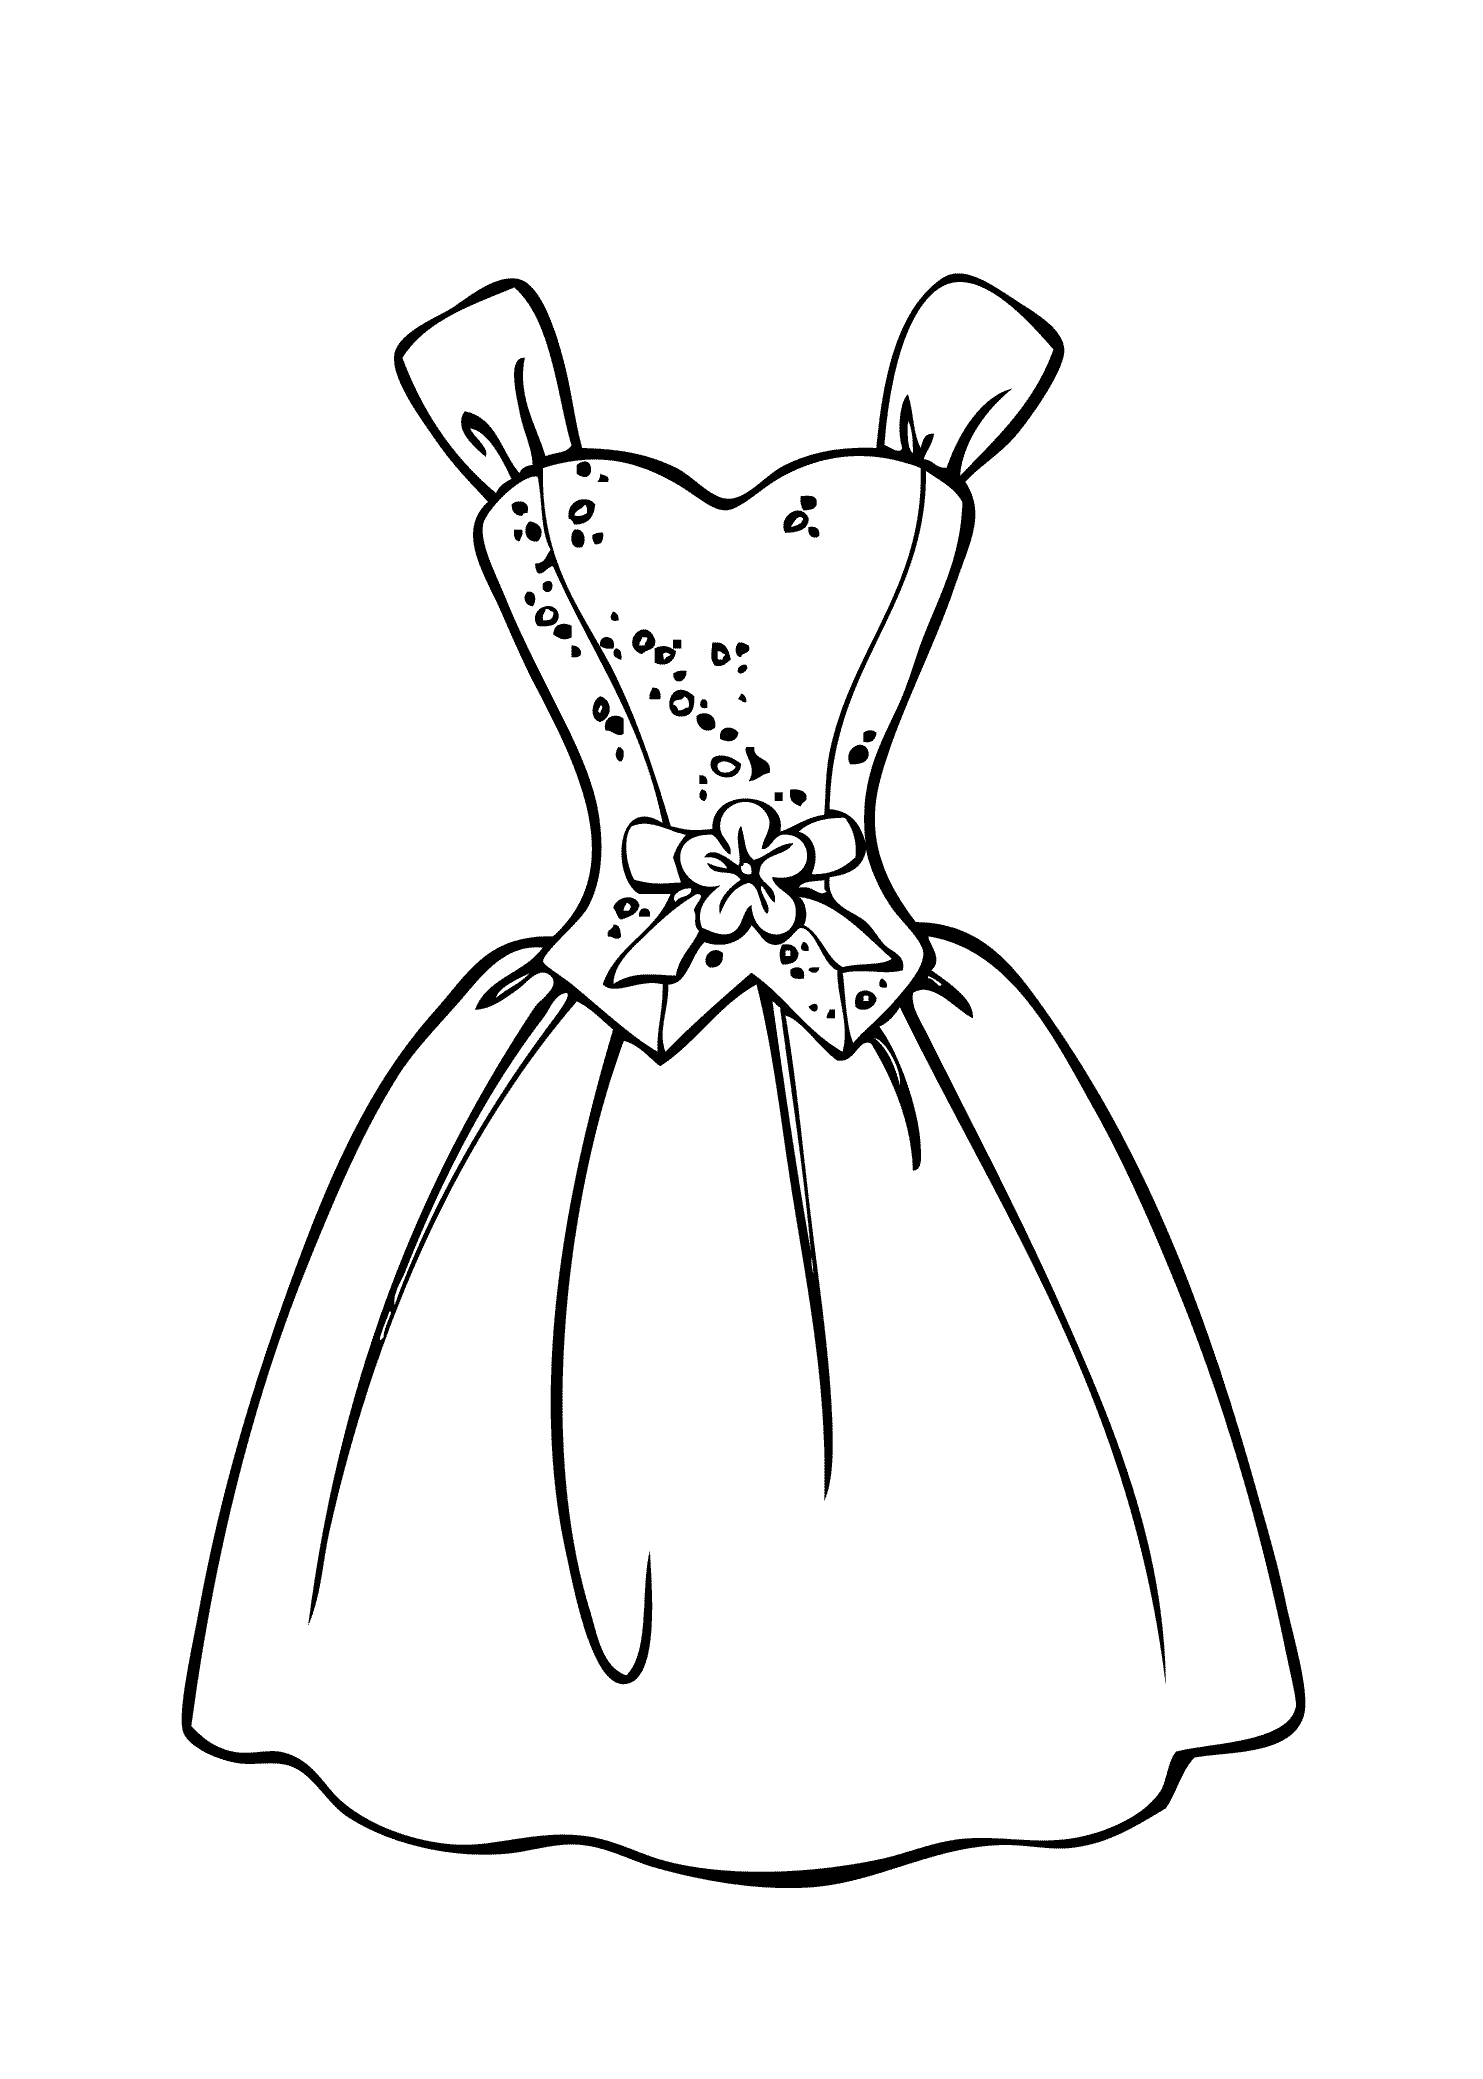 dresses coloring pages dress coloring pages free download best dress coloring pages coloring dresses 